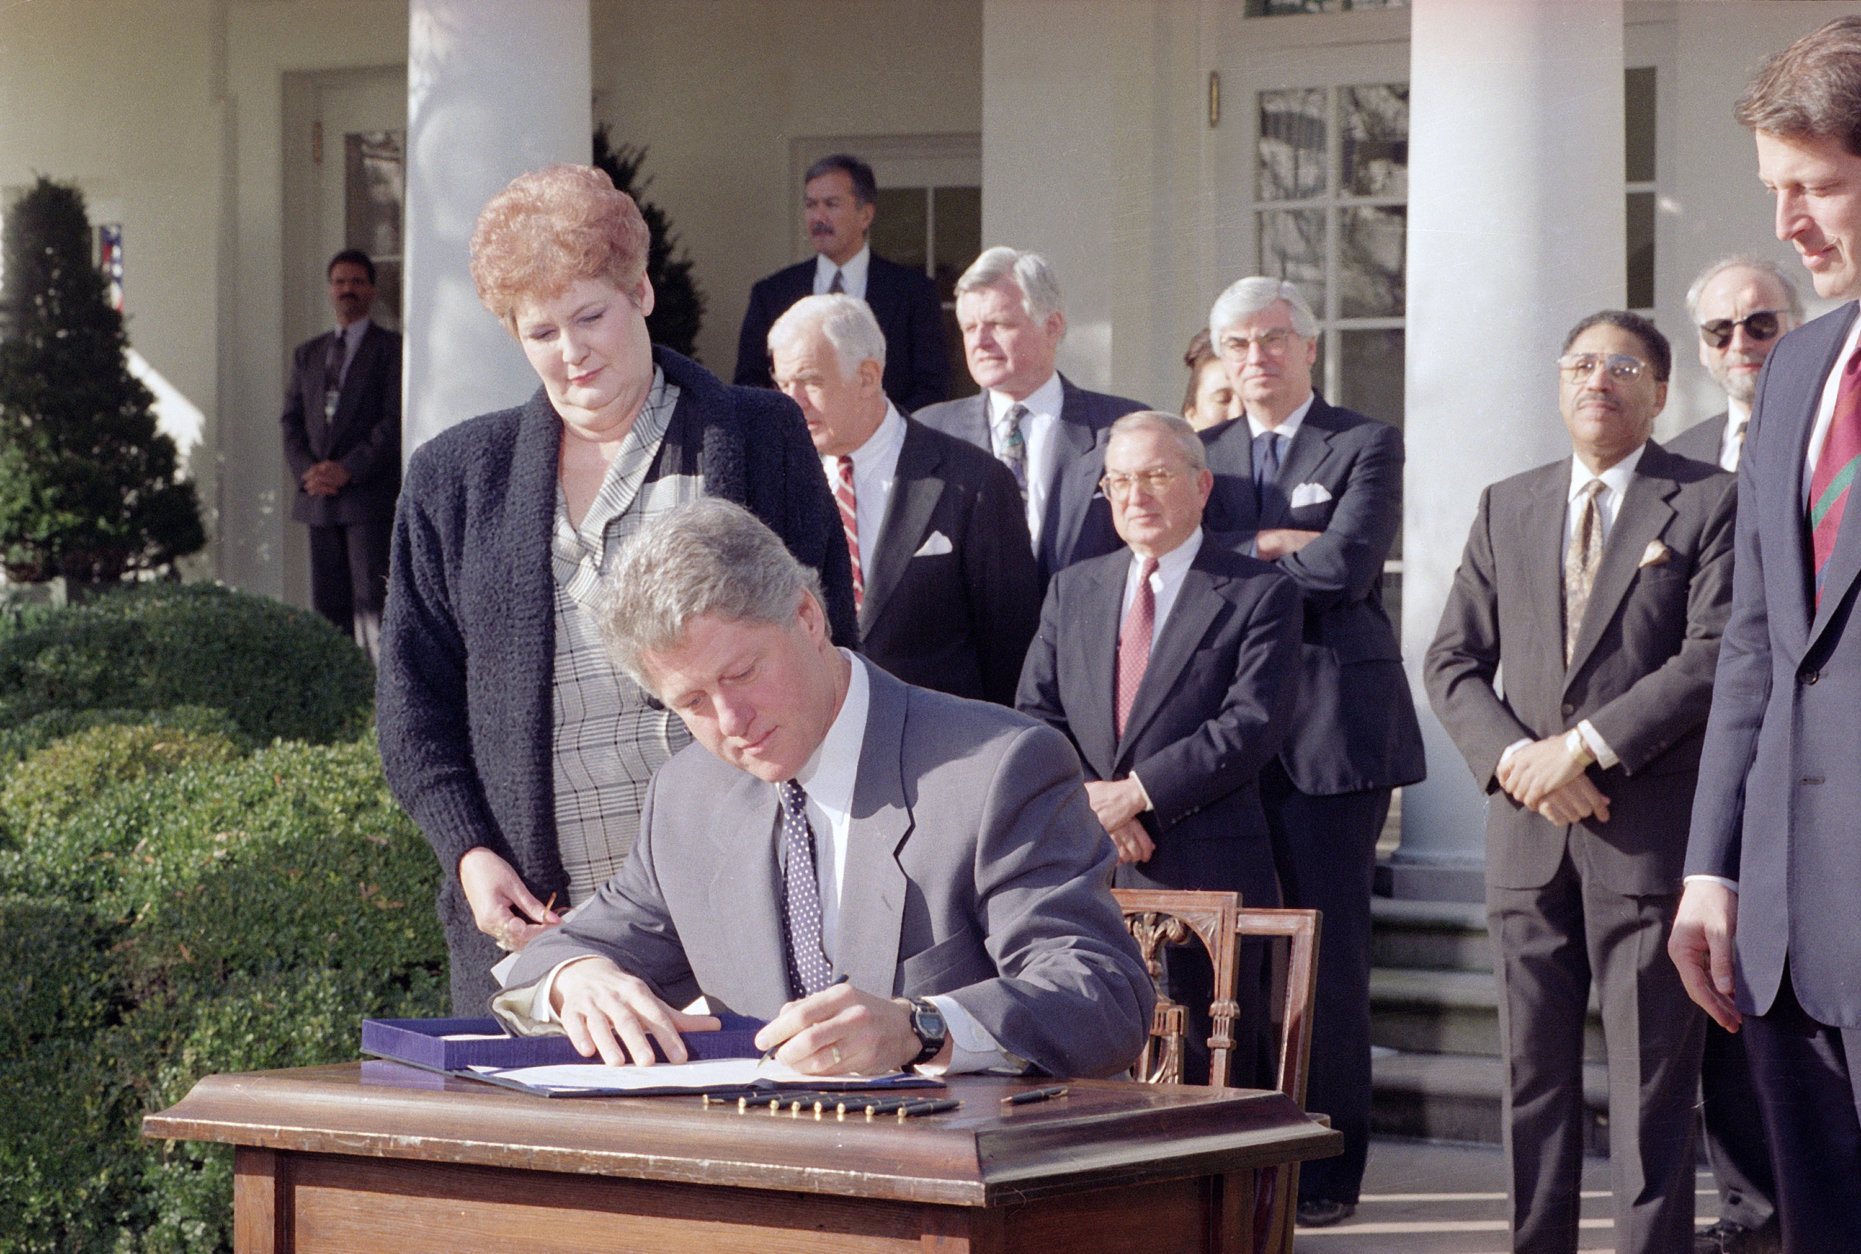 Pres. Clinton signs the Family Leave Bill as Vicki Yandle of Marietta, Ga., looks on in the Rose Garden of the White House, Feb. 5, 1993.  Mrs. Yandle lost her job when she took time off when her daughter was sick.  Behind the president, from left, are: House Speaker Thomas Foley, Sen. Edward M. Kennedy (D-Mass.), Rep. William Ford (D-Mich.), and Sen. Christopher Dodd (D-Conn.) At far right is Vice President Al Gore. (AP Photo/Greg Gibson)